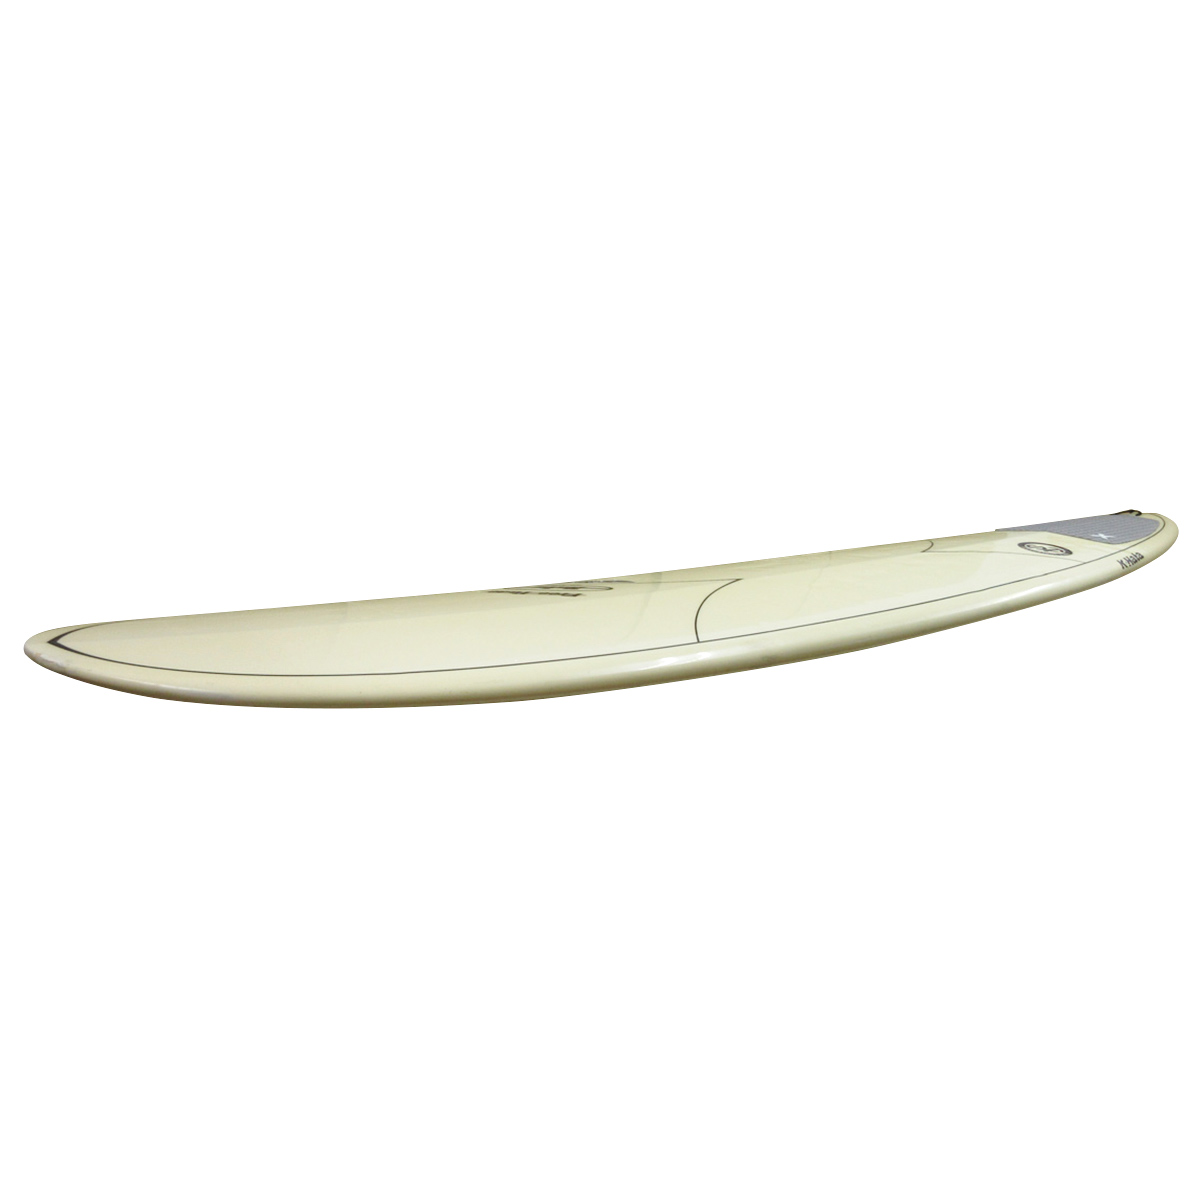 HATA SURFBOARDS / 9`4 All-round shaped by Kunio Hata 